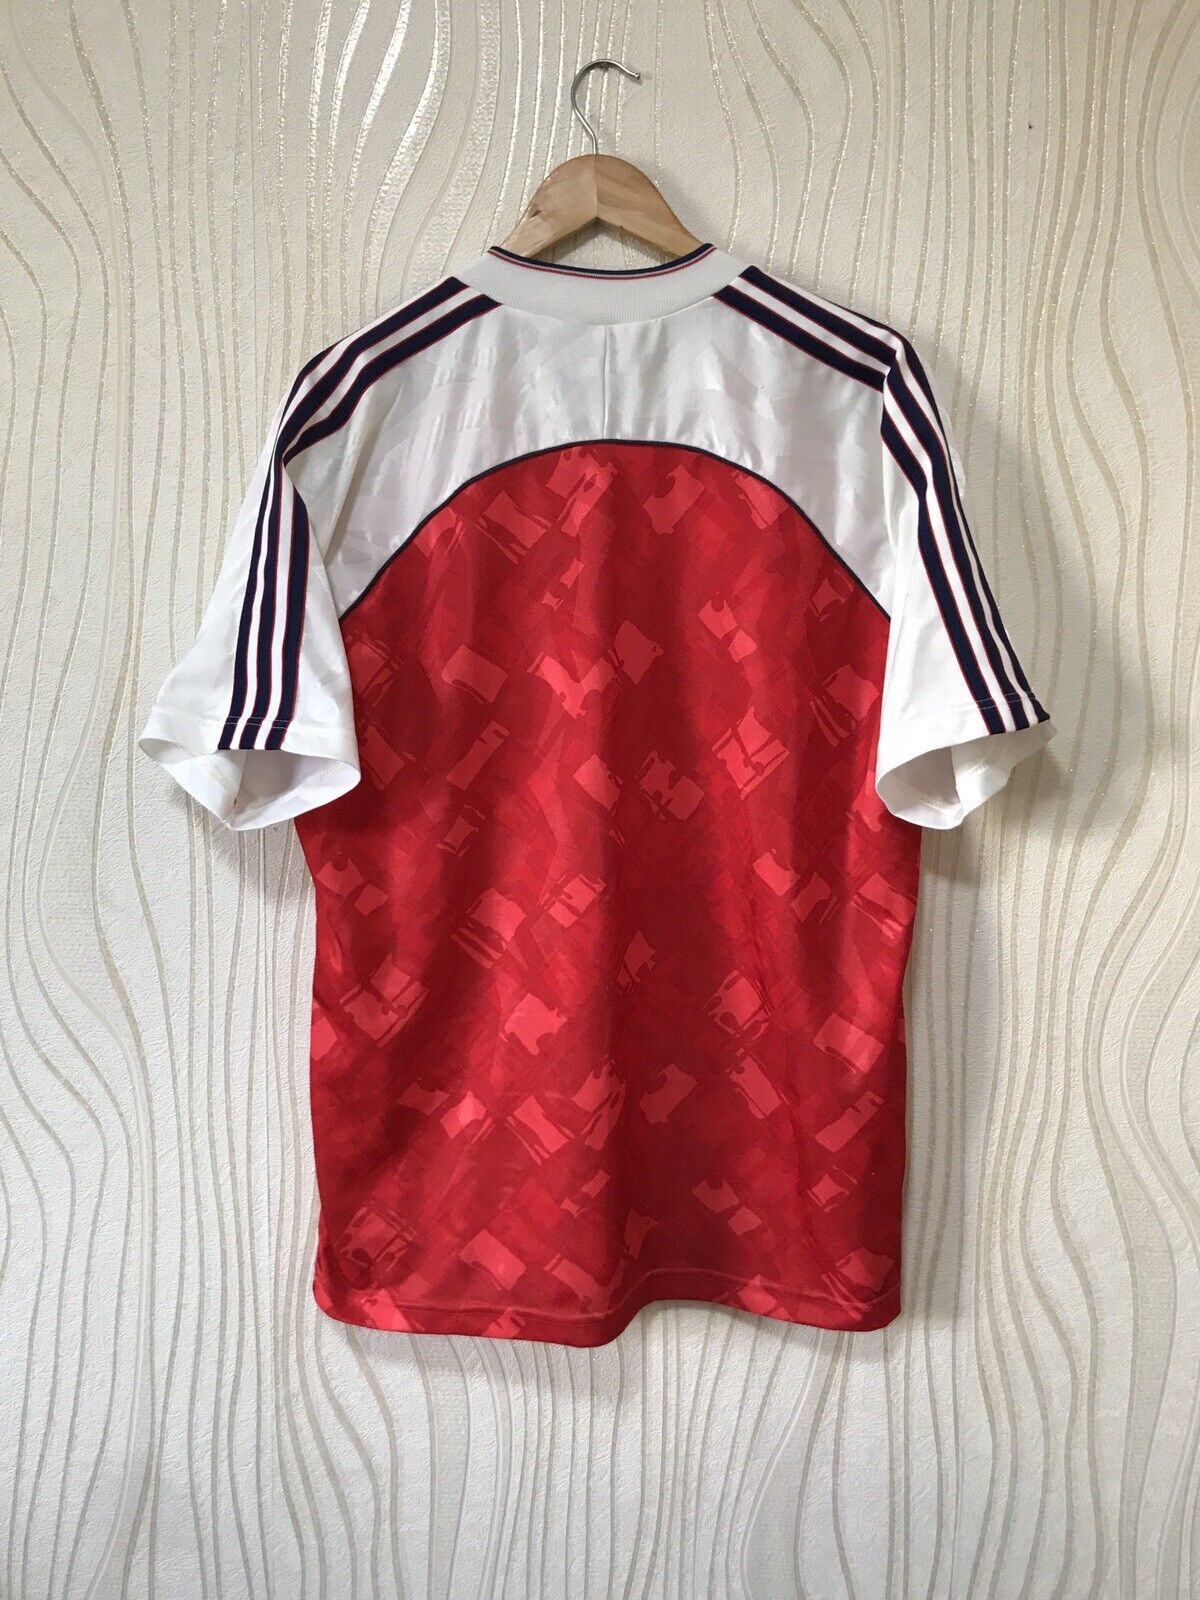 Adidas Arsenal 90-92 Home Jersey Red - MULTCO/WHITE/RED